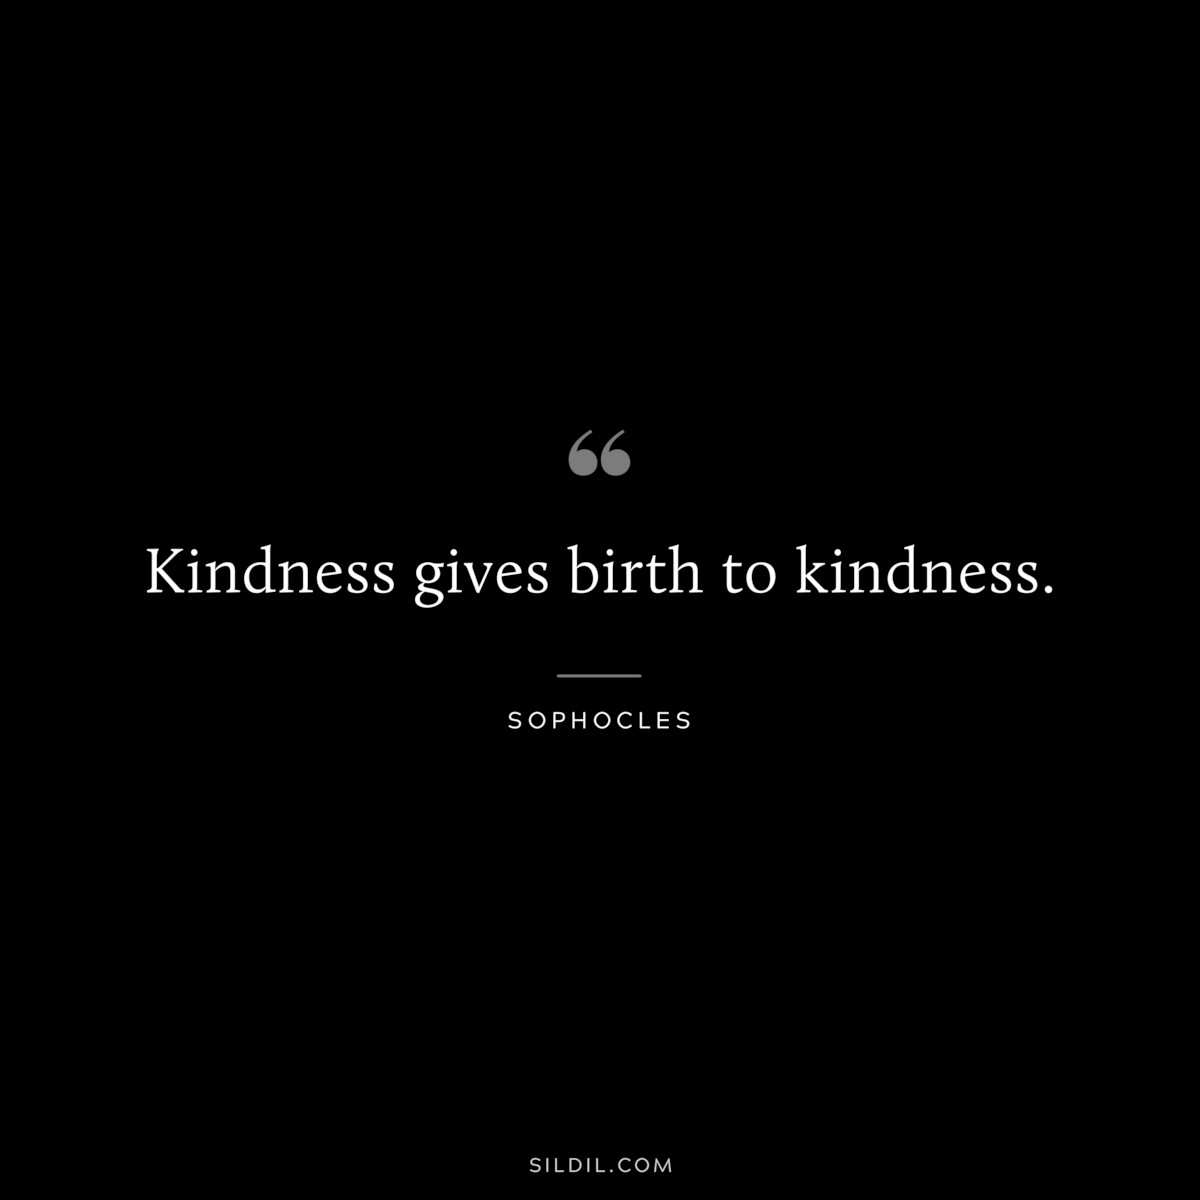 Kindness gives birth to kindness. ― Sophocles